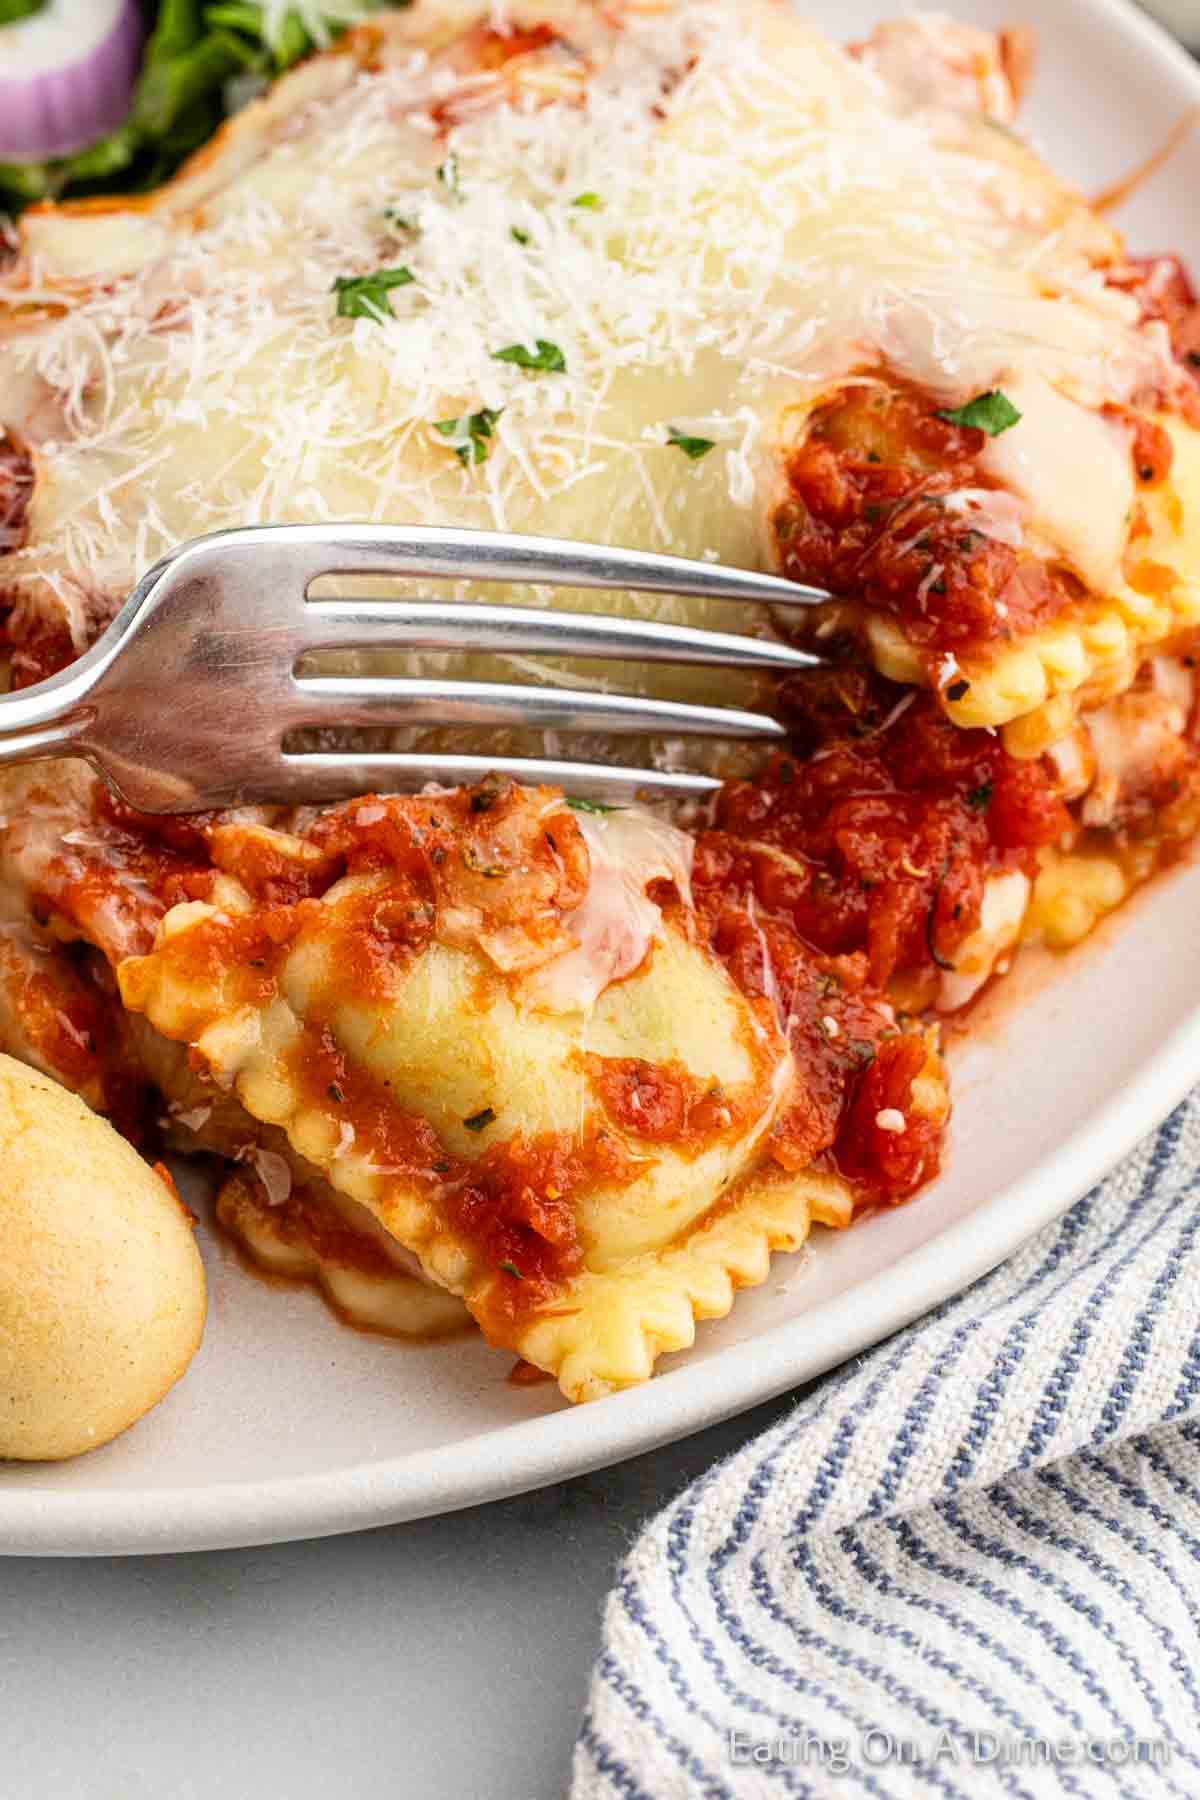 Close up image of Ravioli baked topped with sauce and melted cheese on a plate with a fork